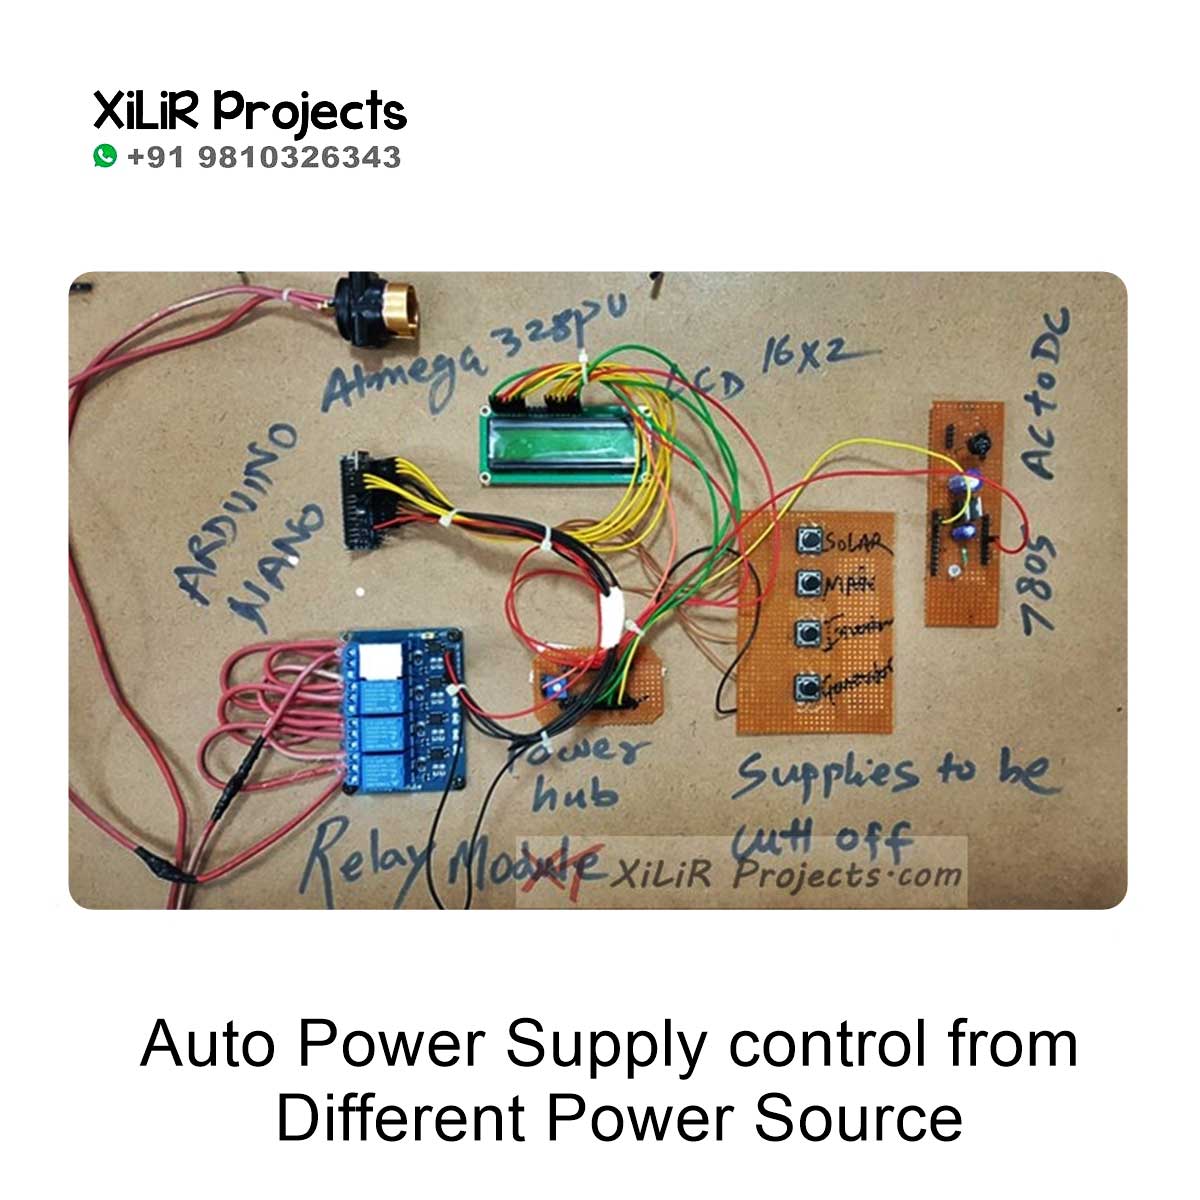 Auto-Power-Supply-control-from-Different-Power-Source.jpg